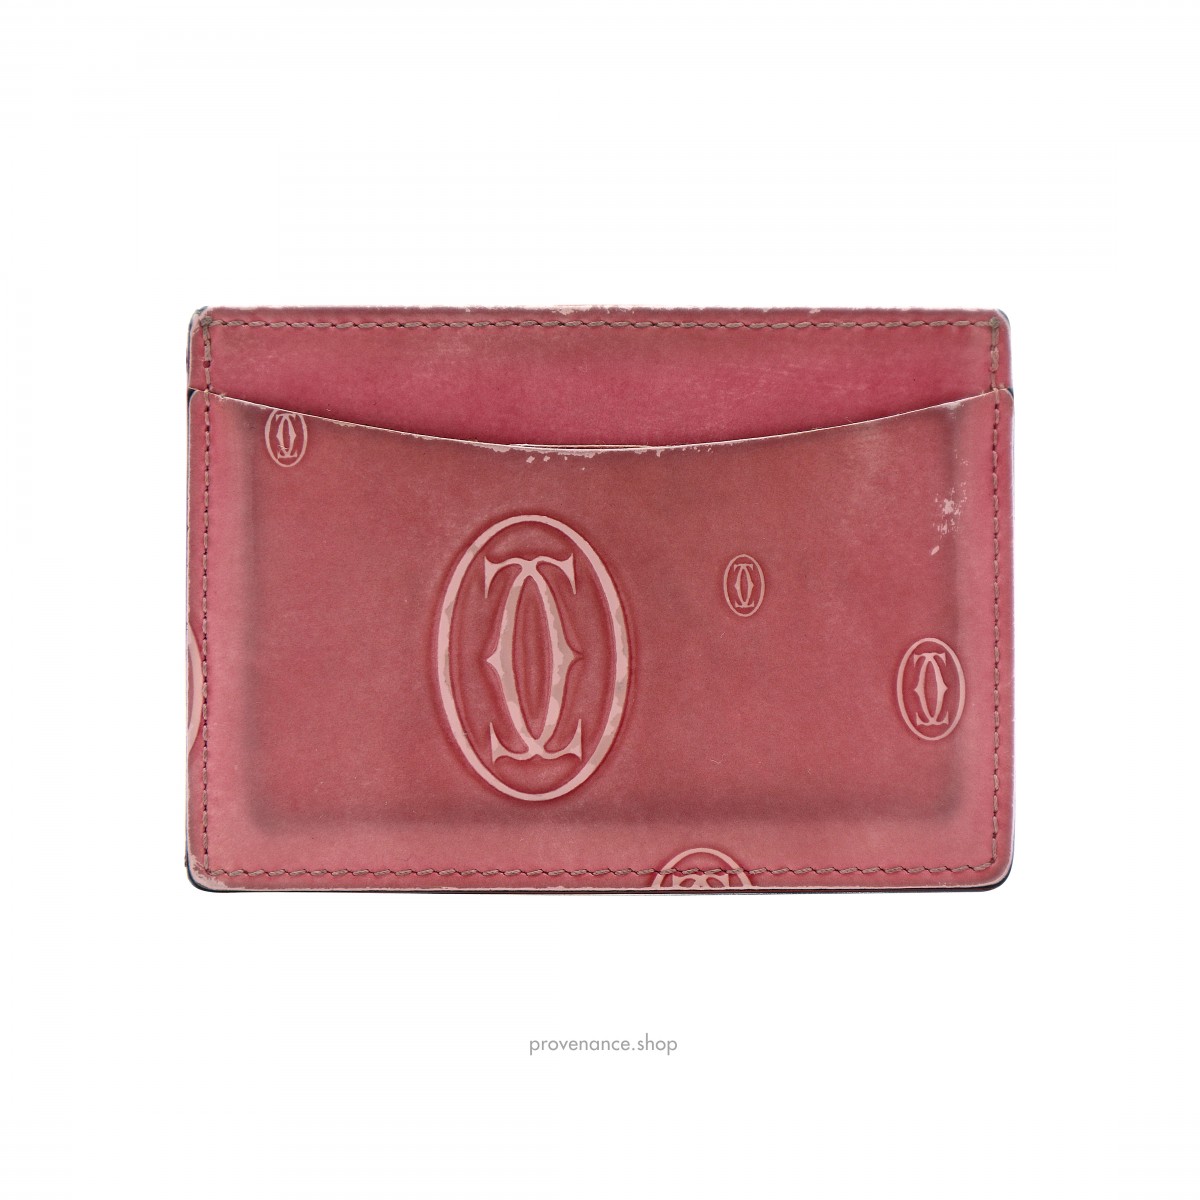 Cartier Happy Cardholder - Pink Patent Leather - 1